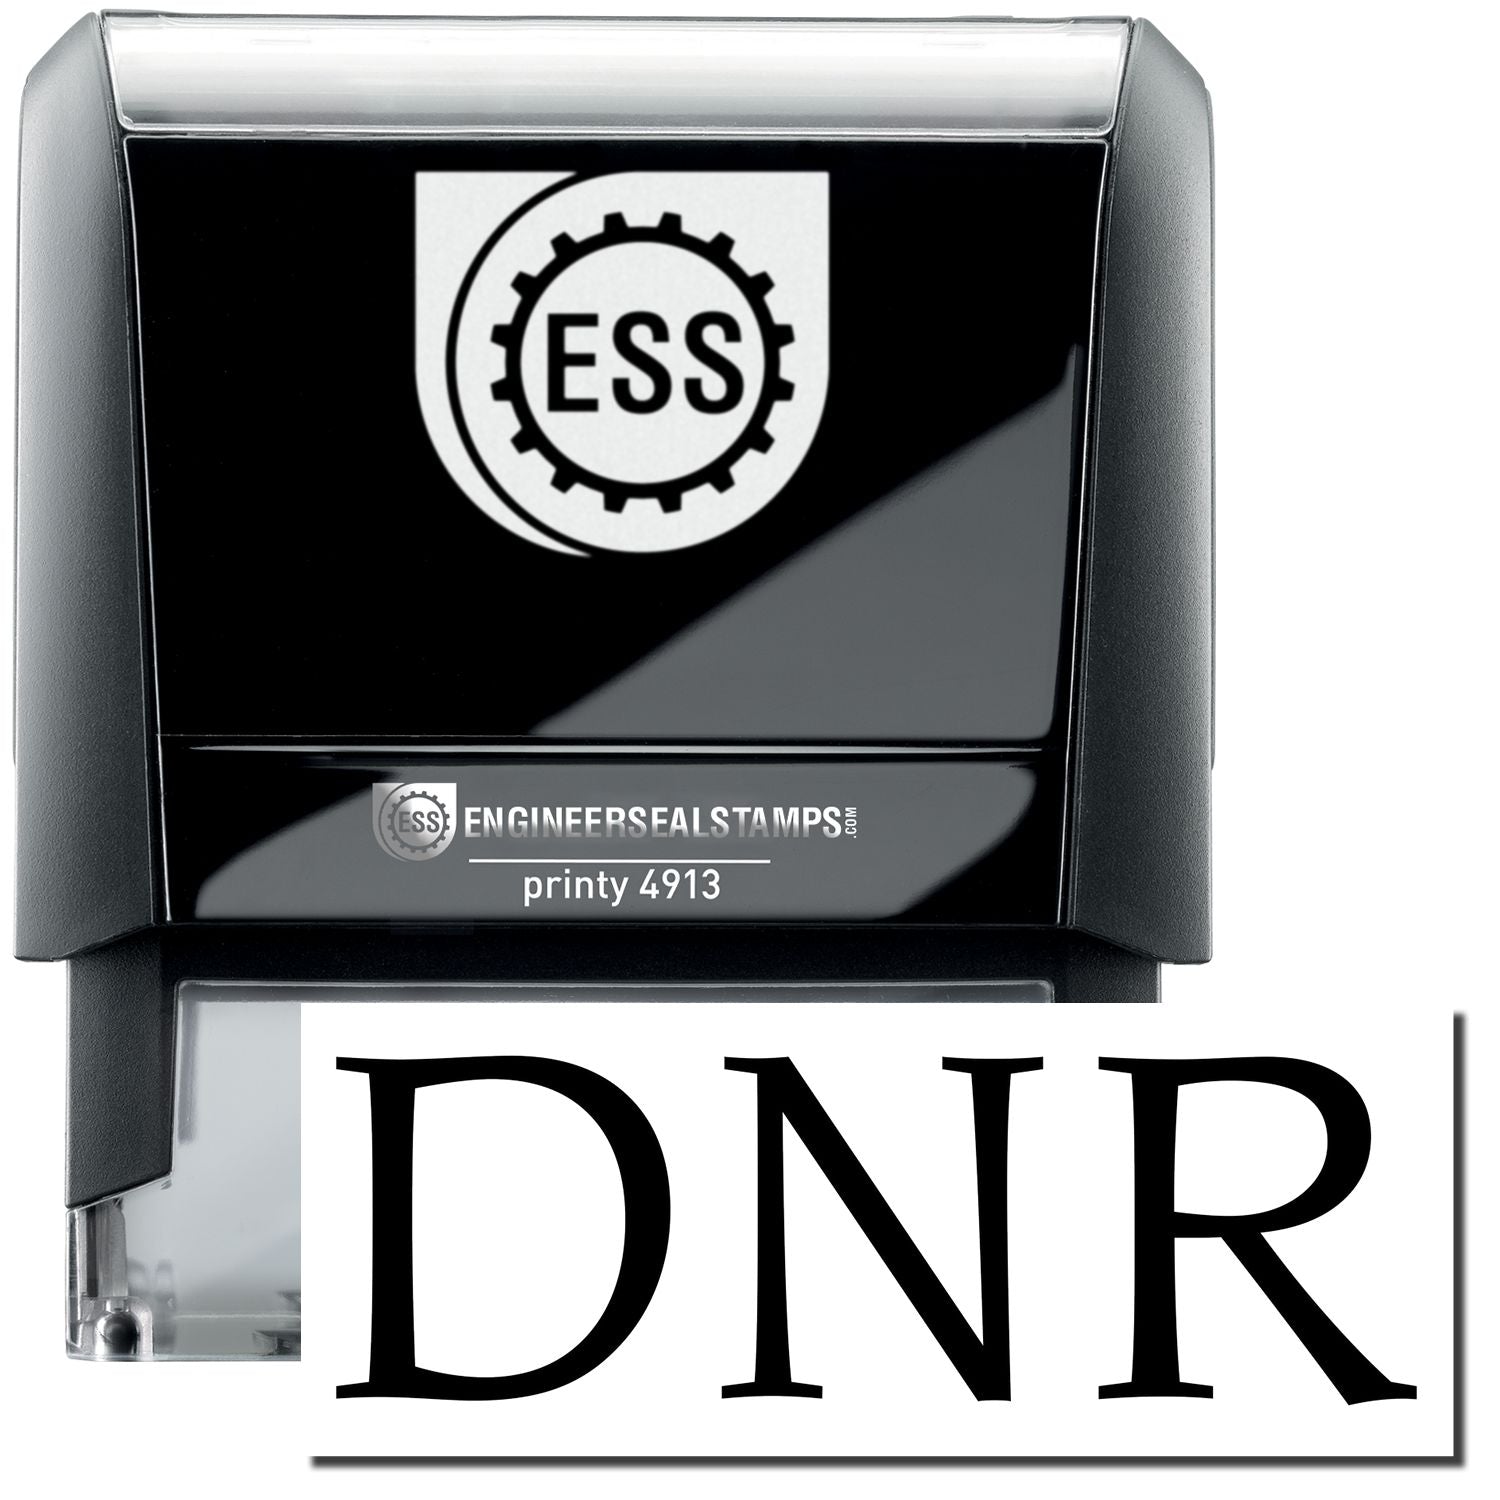 A self-inking stamp with a stamped image showing how the text "DNR" in a large bold font is displayed by it.